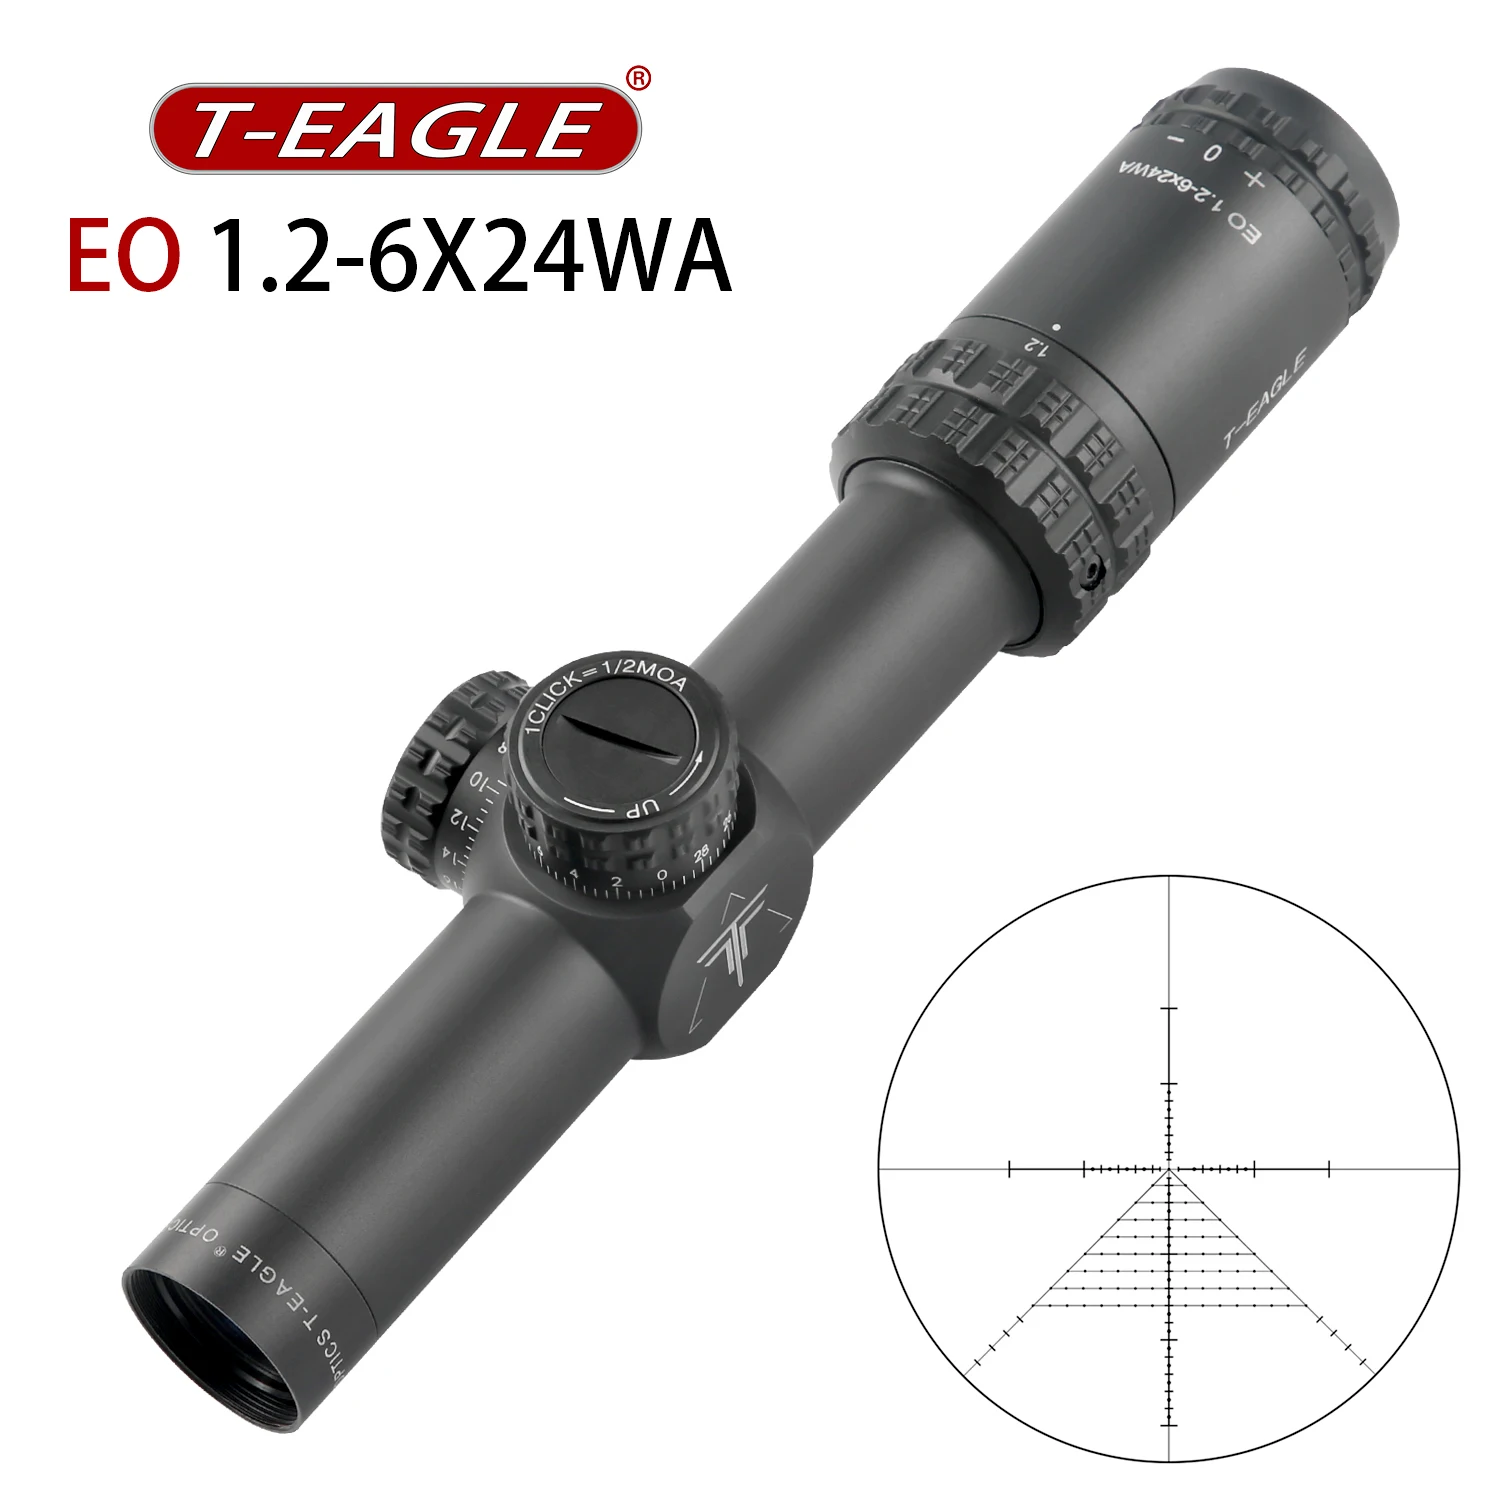 TEAGLE EO 1.2-6X24 Rifle Scopes With illumination Tactical Riflescope for Airsoft Air Guns Sniper Rifle Scope Hunting